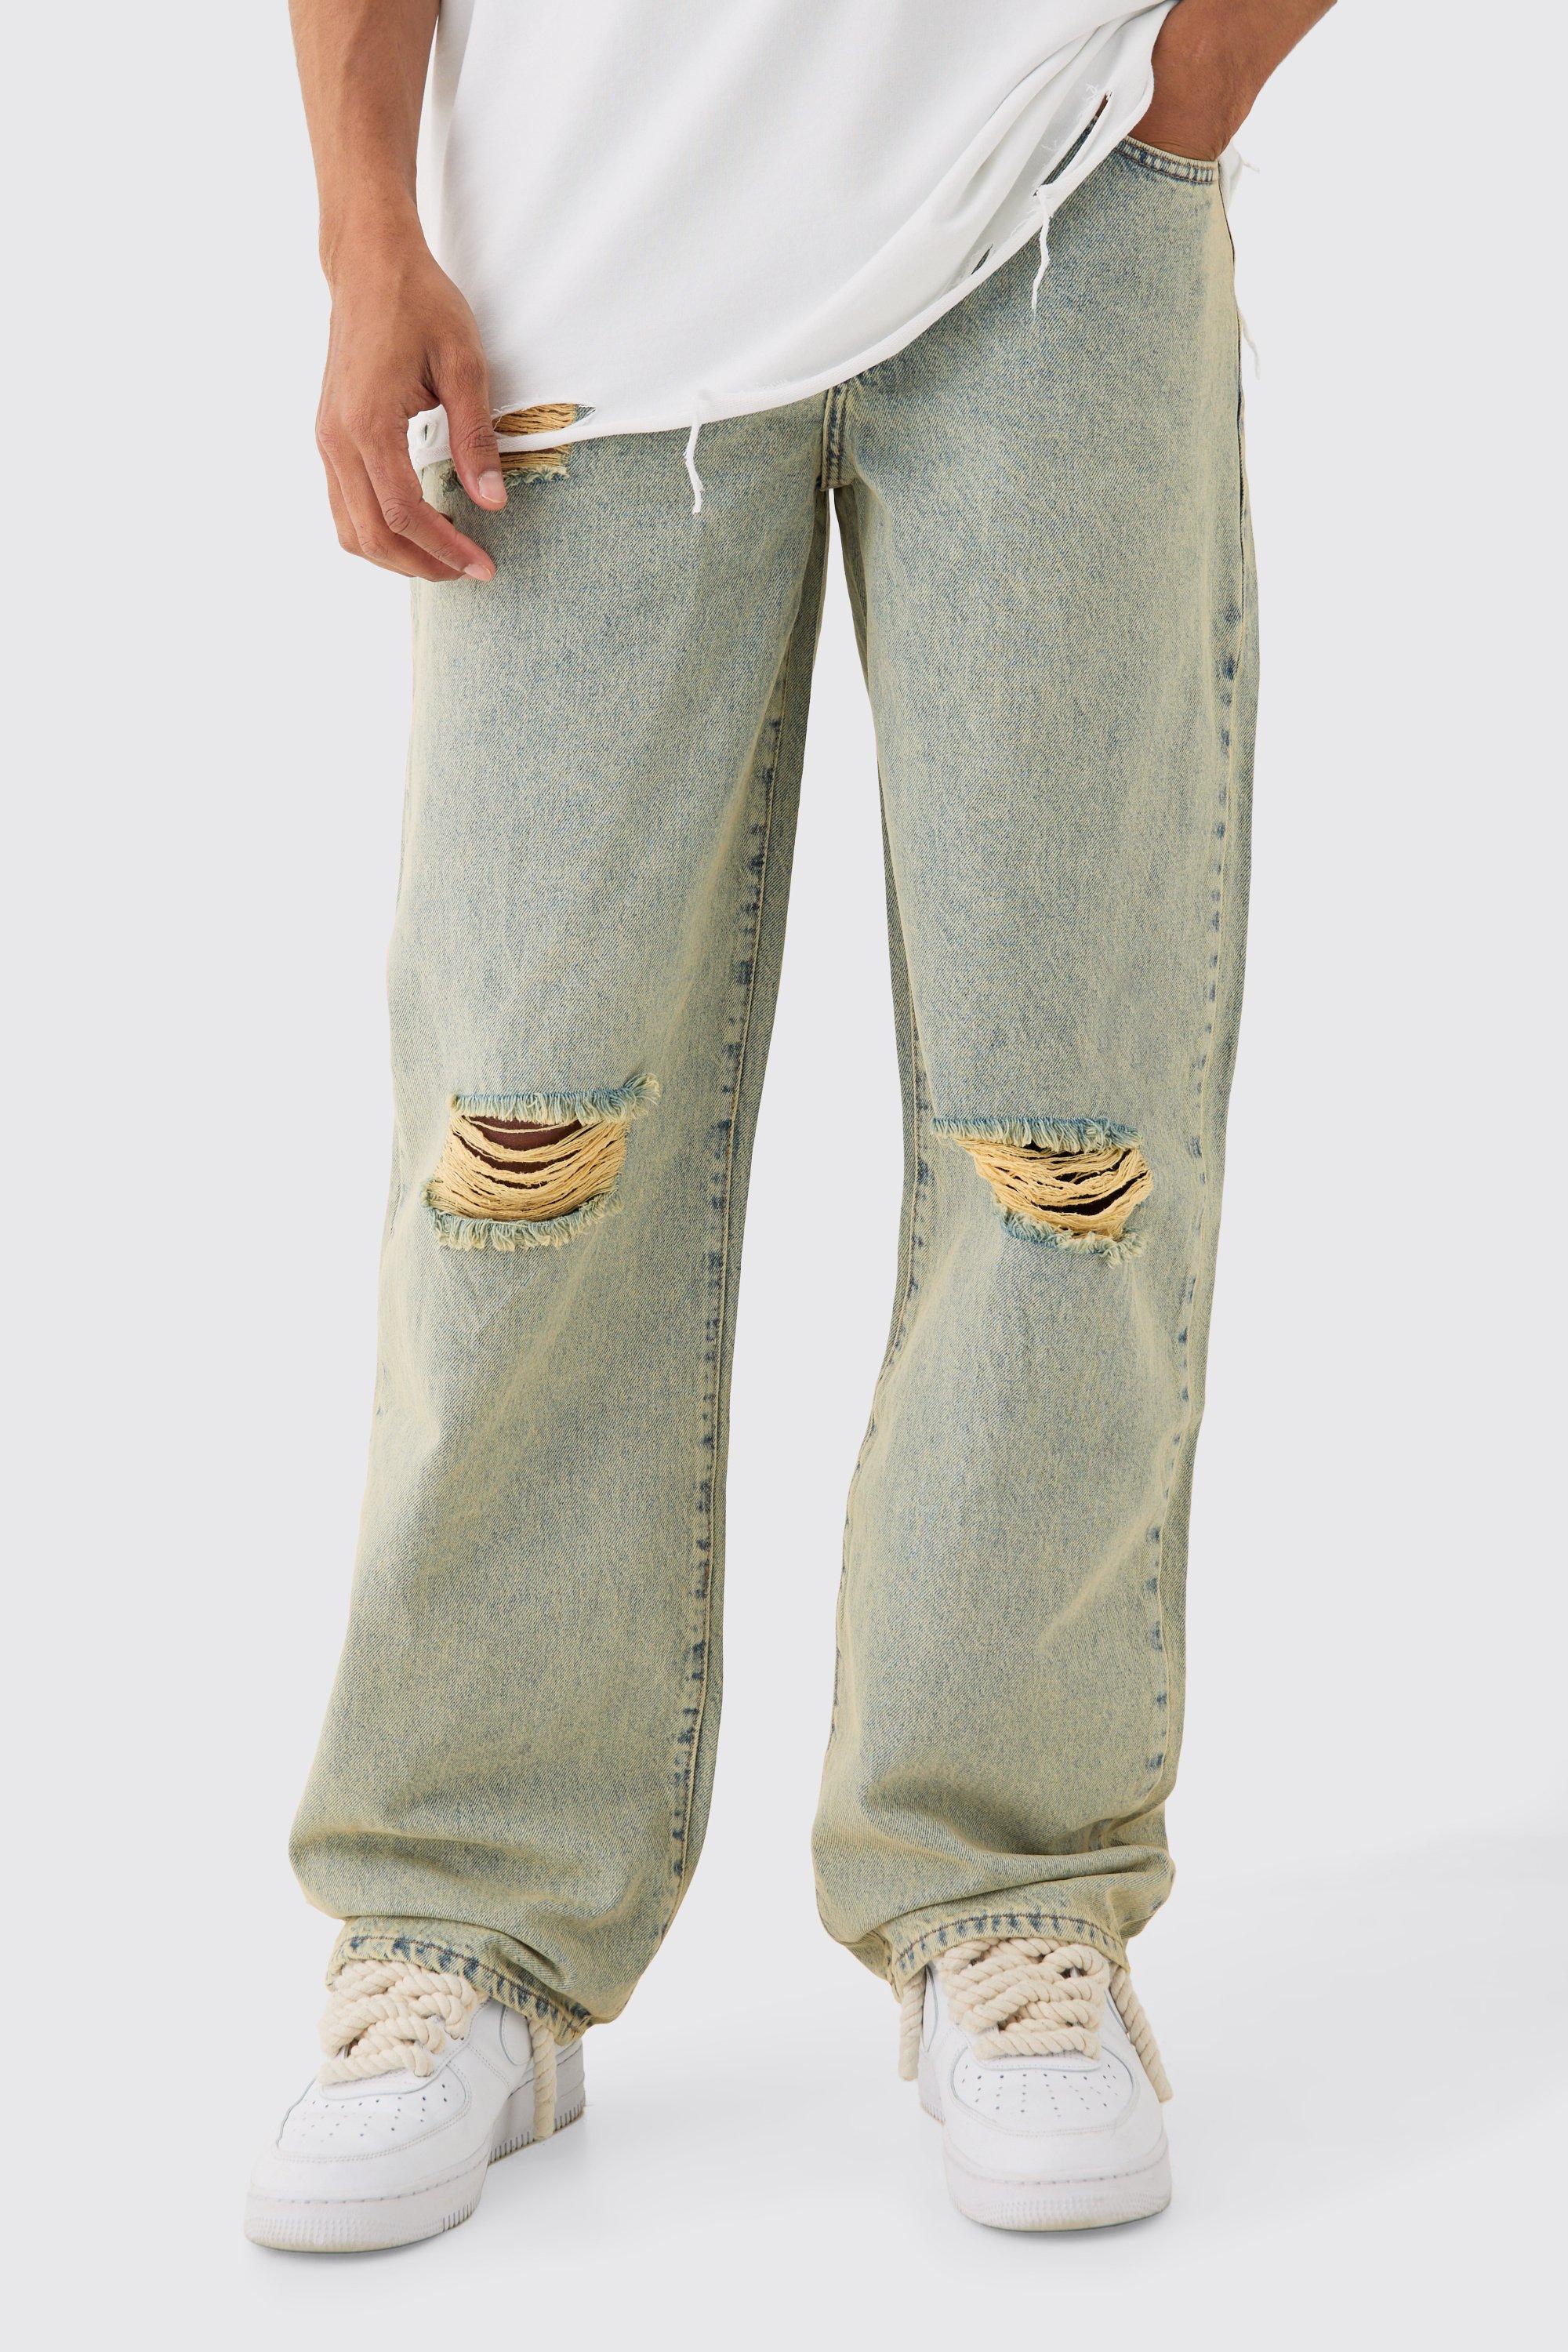 Image of Baggy Rigid Green Tint Ripped Knee Jeans, Verde